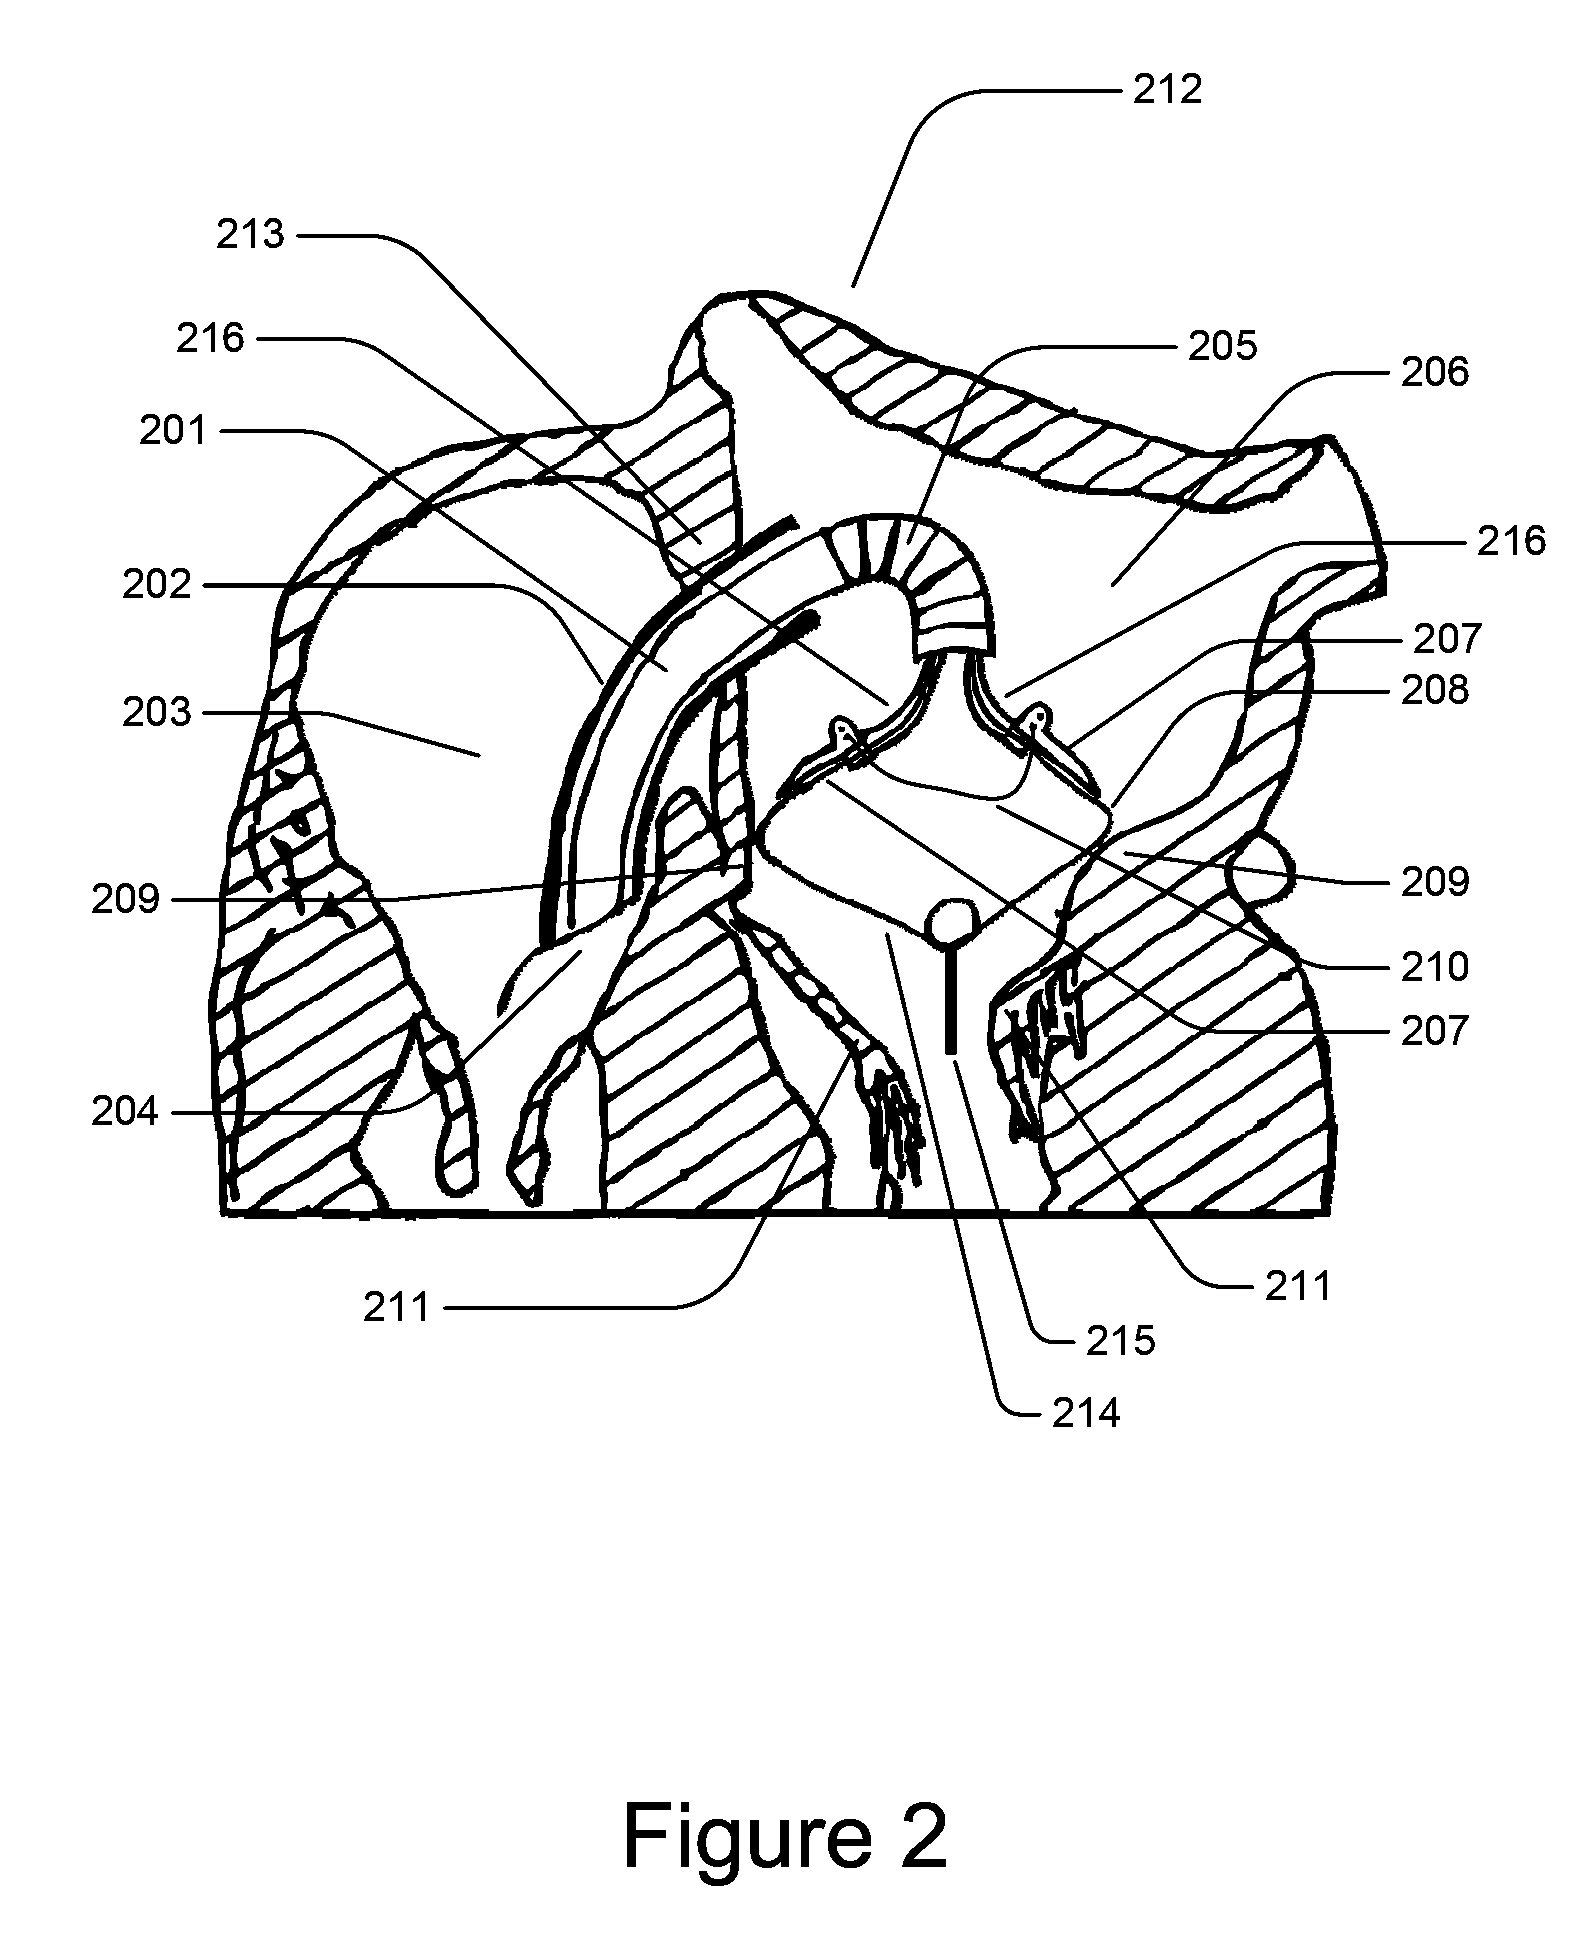 Medical Device for Constricting Tissue or a Bodily Orifice, for example a mitral valve